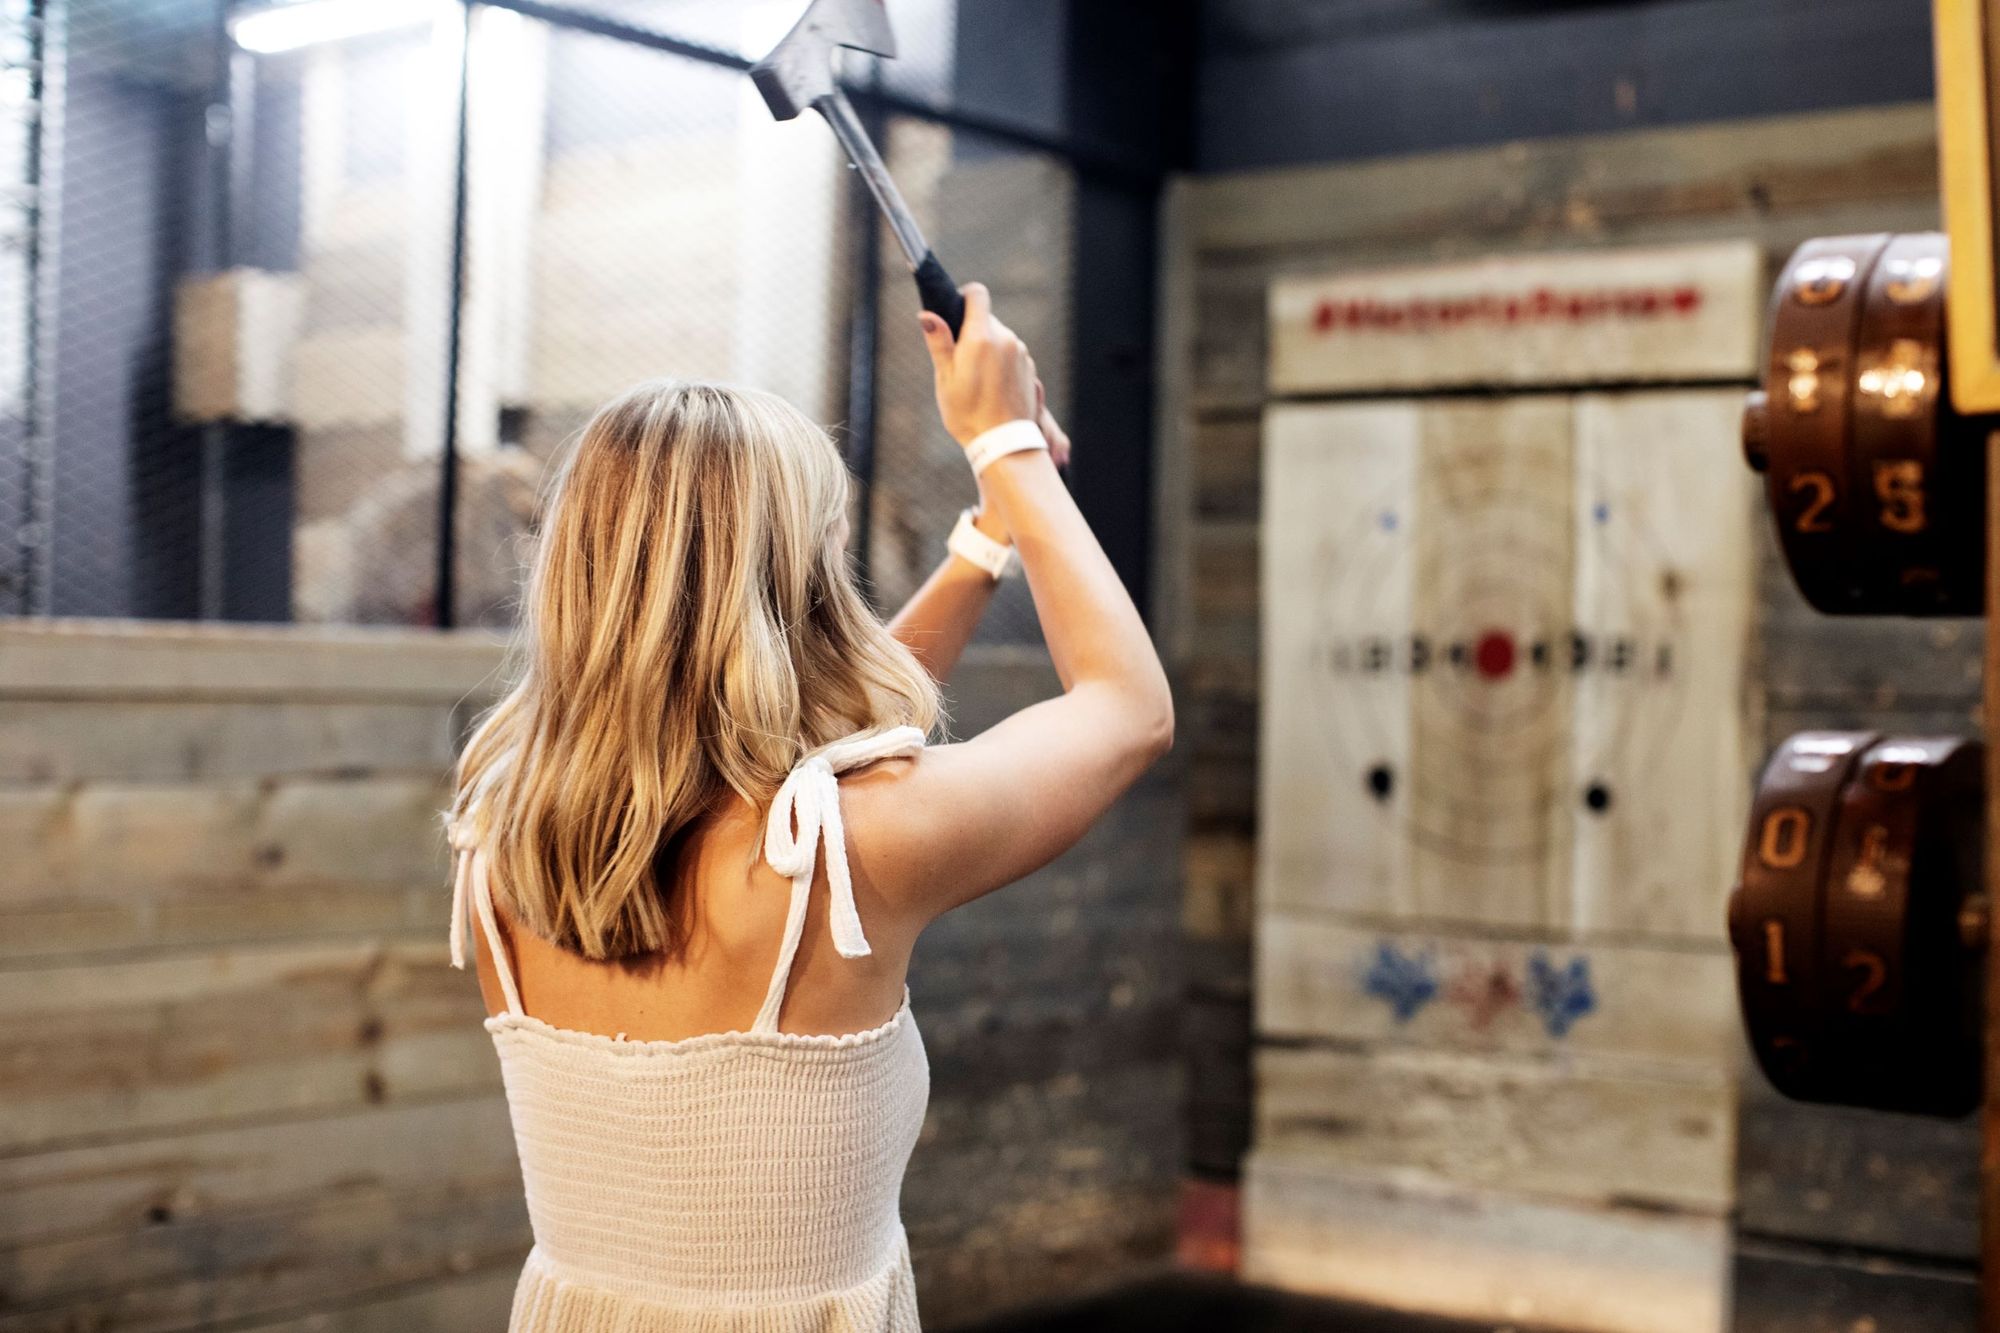 A woman holds an axe in the air before throwing it at a target